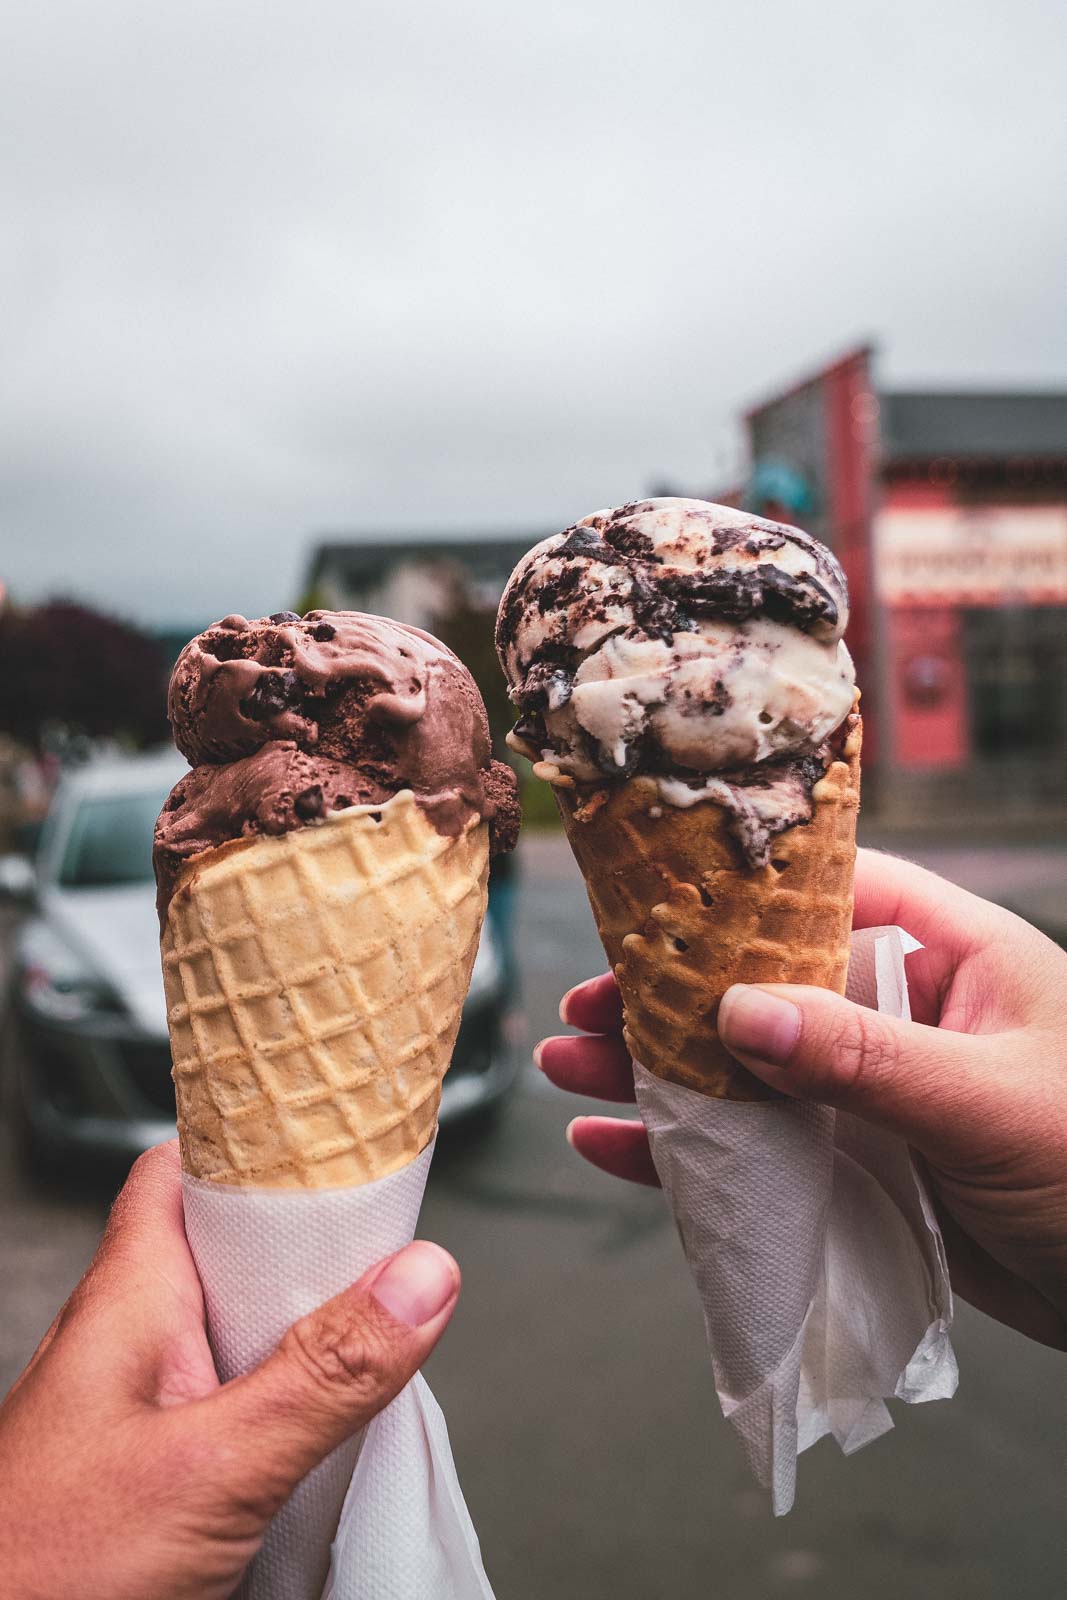 Two ice cream cones being held up in Seaside.